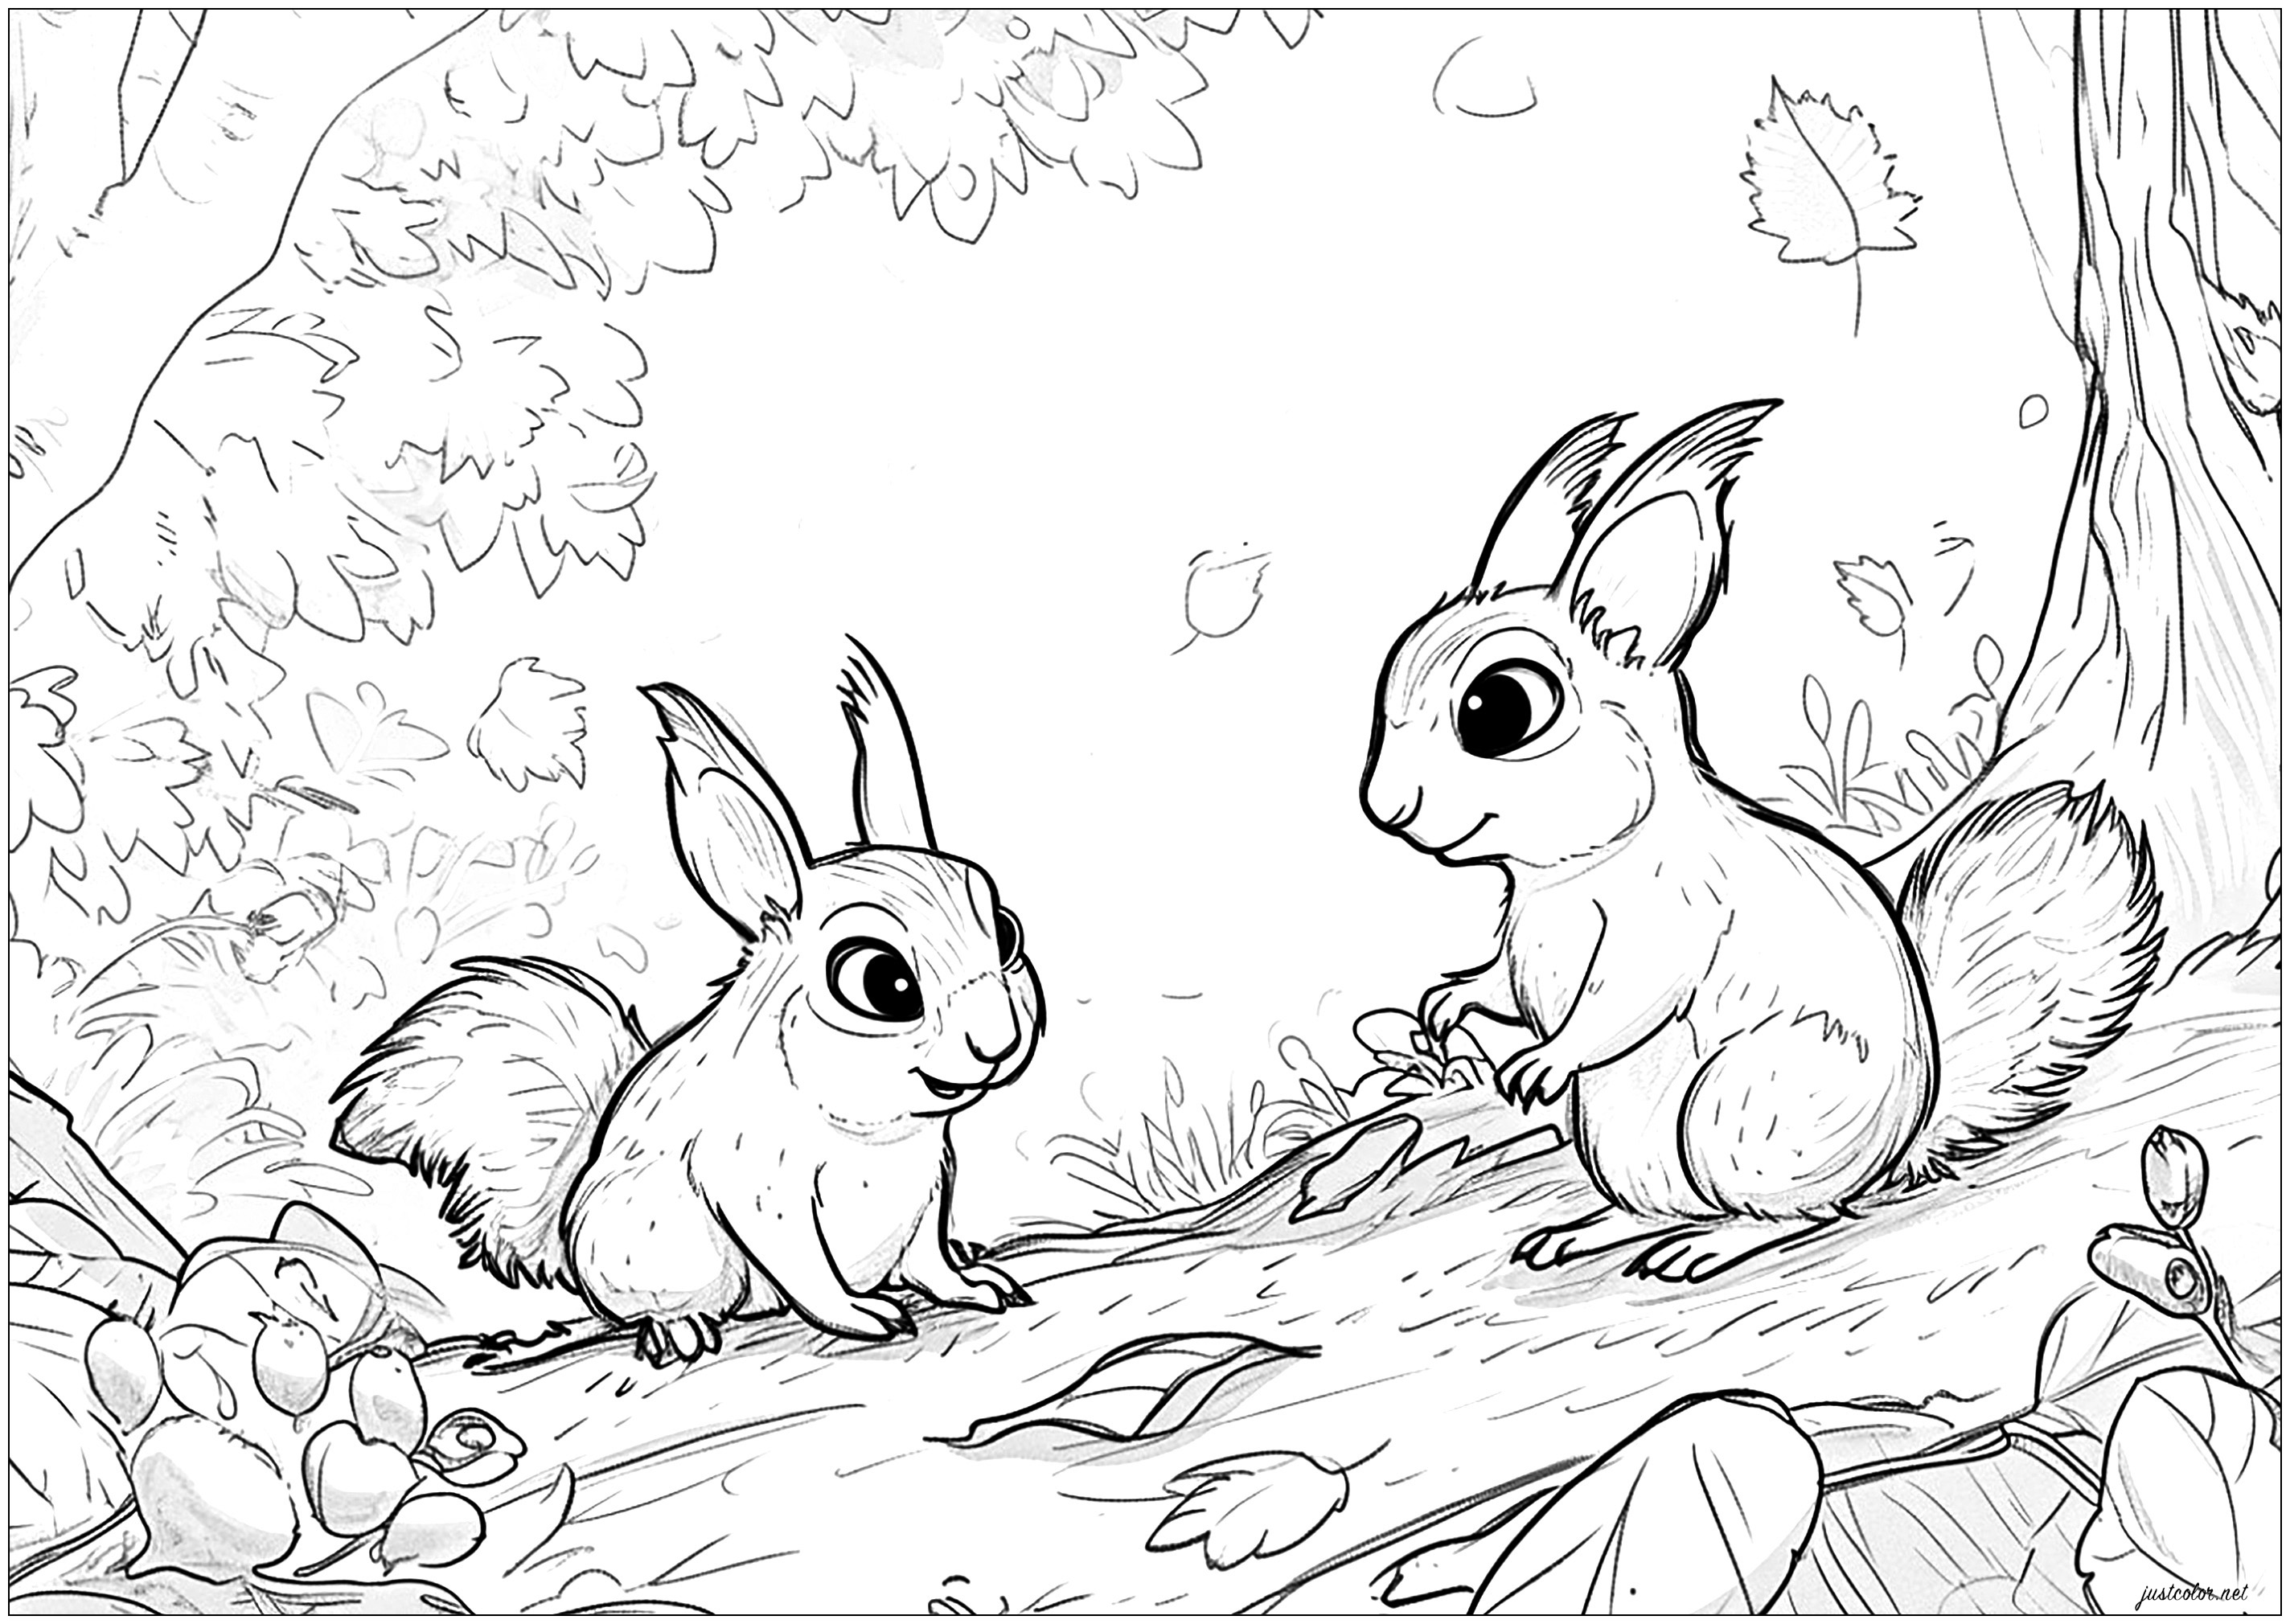 Simple Squirrels coloring page to print and color for free